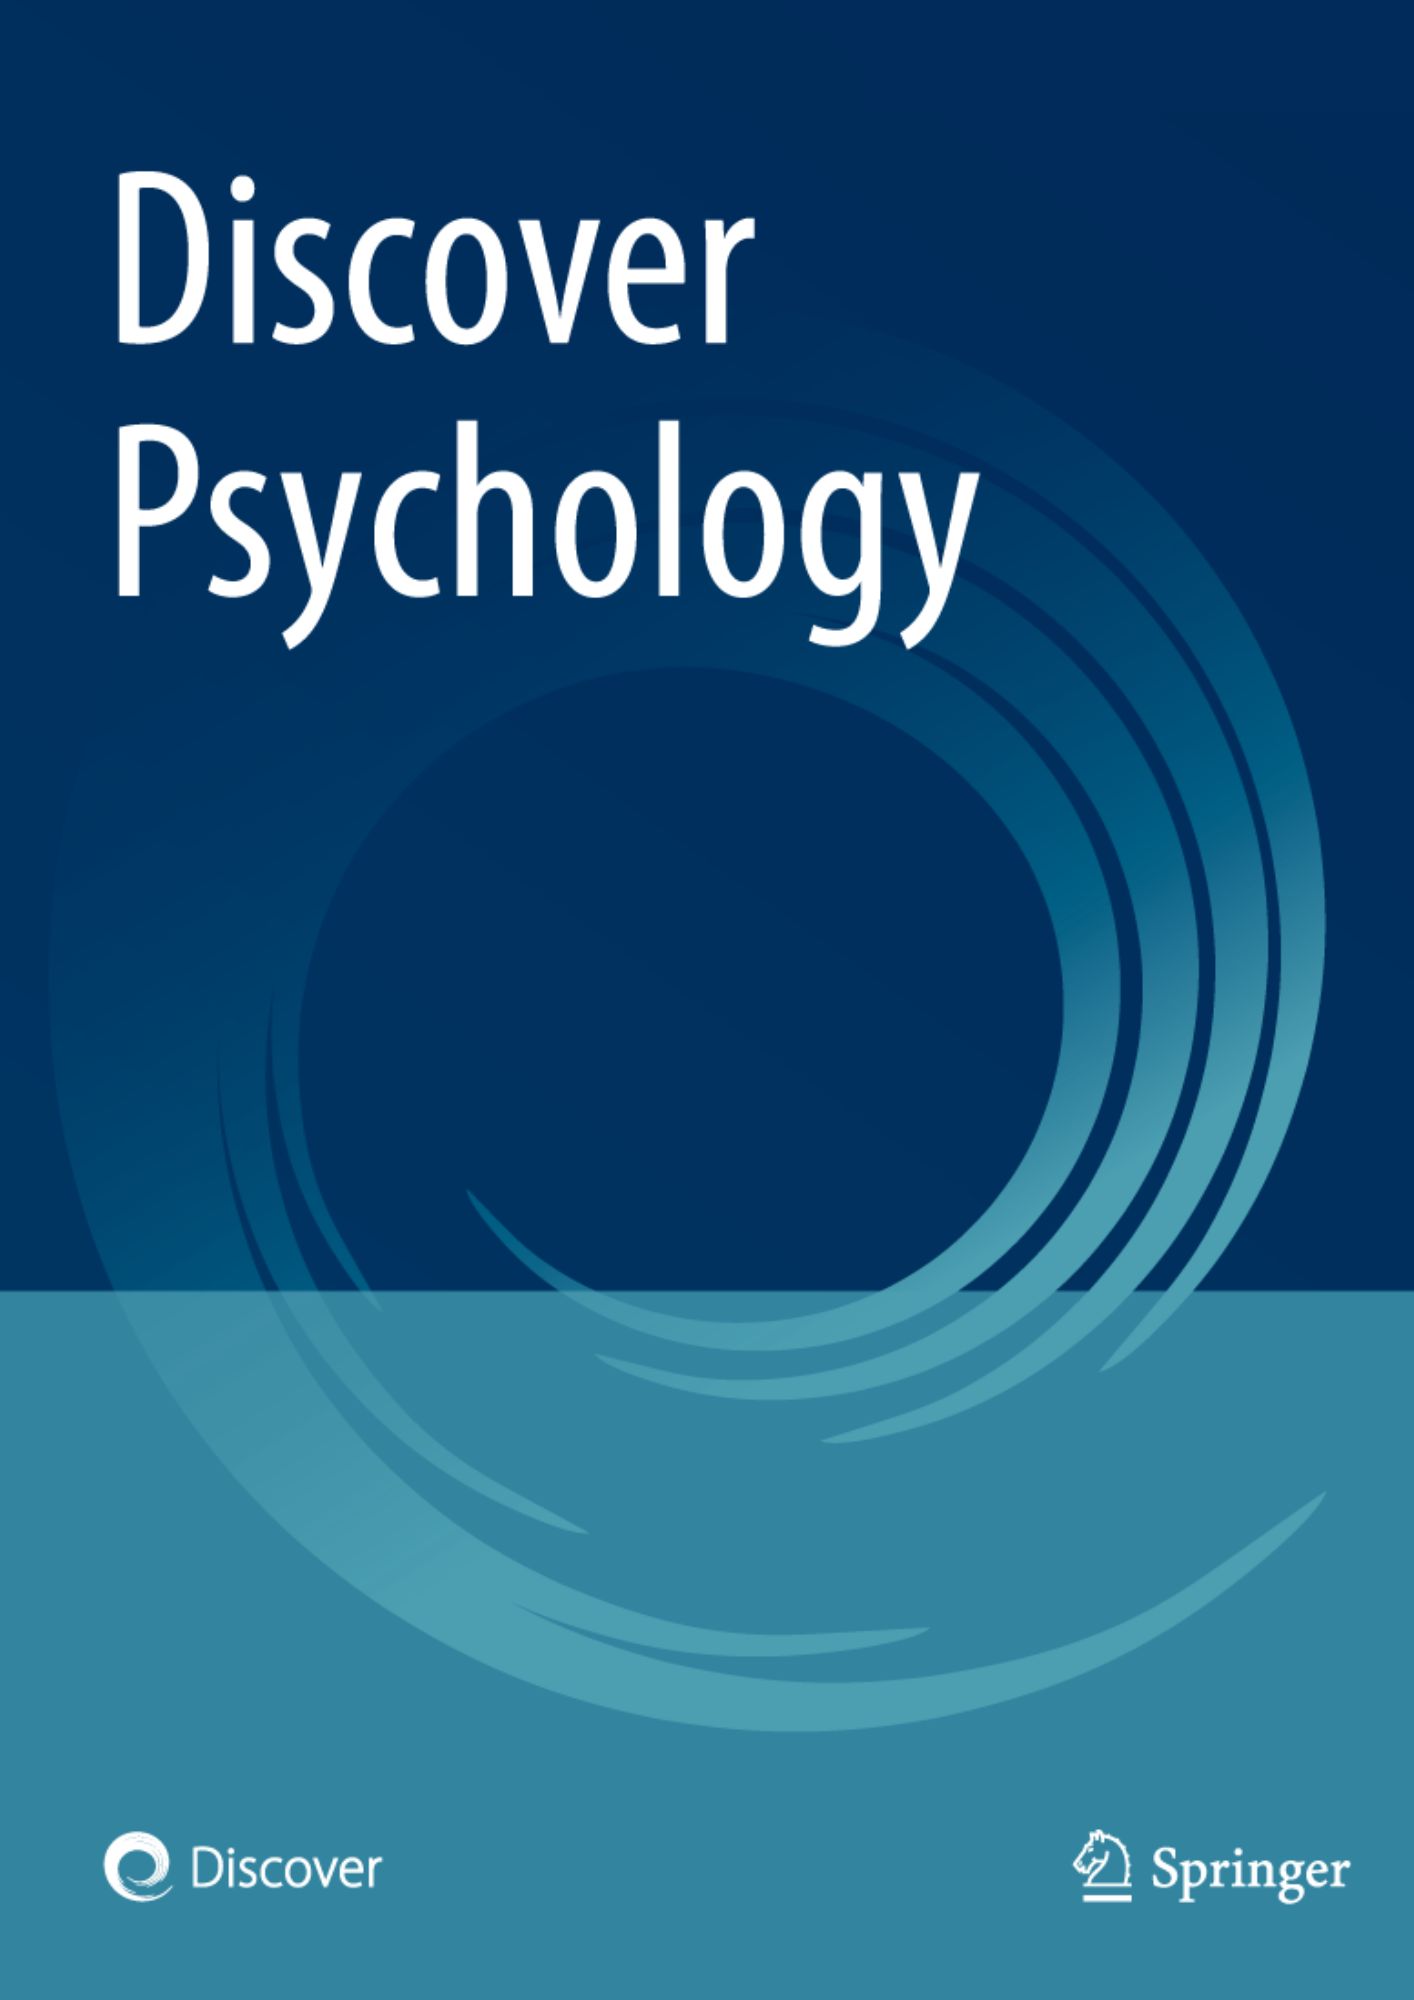 Exploring the relationship between social connectedness and mental wellbeing: the mediating role of psychological resilience among adults in Azerbaijan